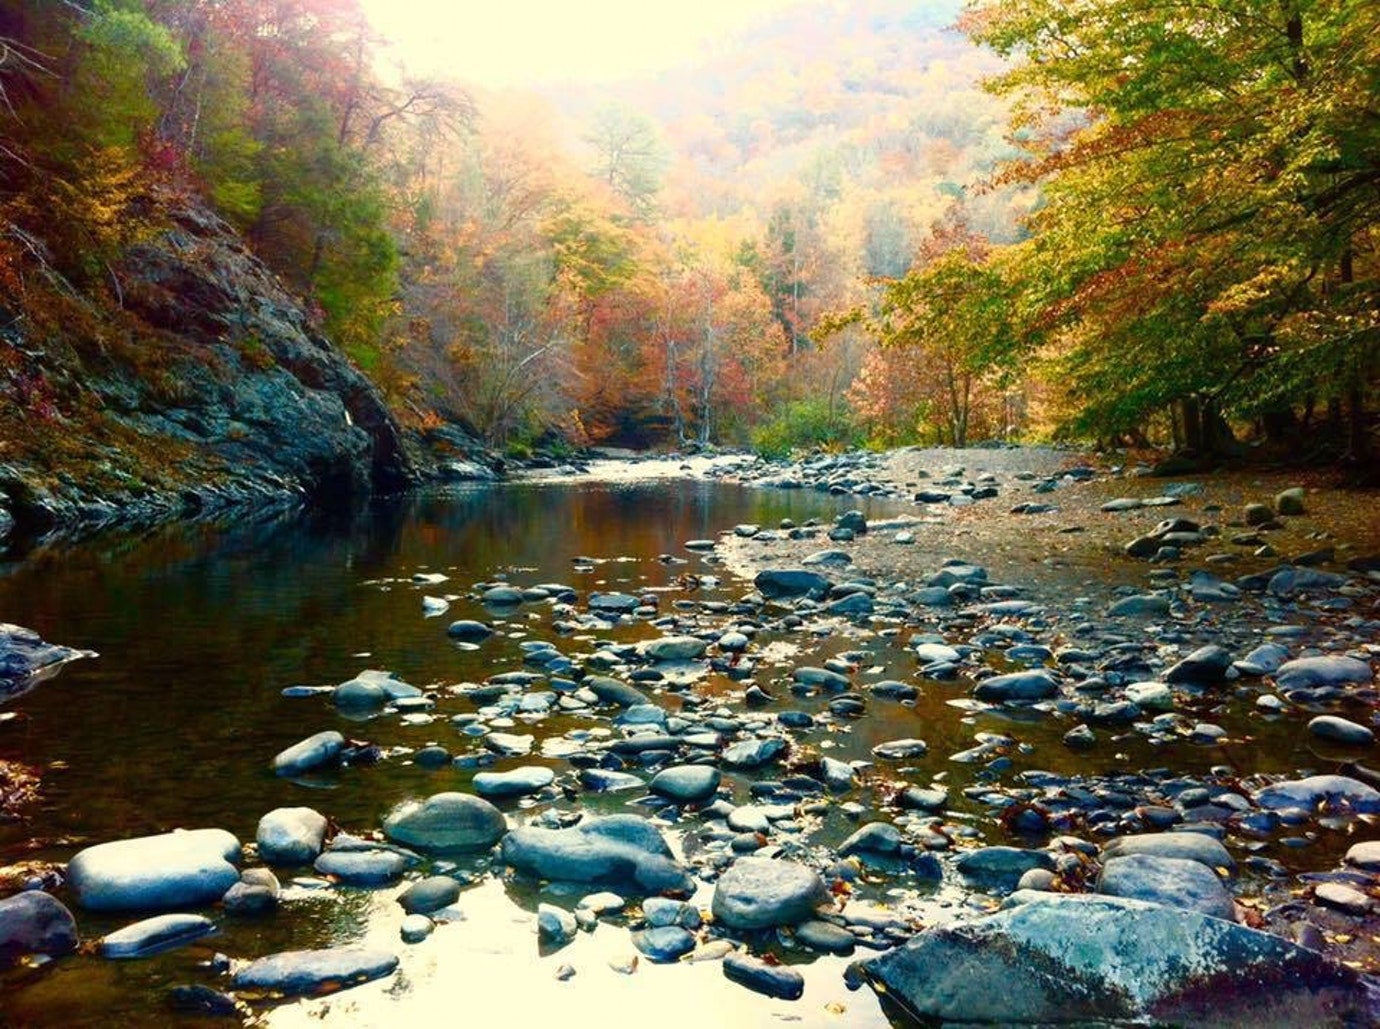 smooth rocks visible in calm river as fall foliage provides color to the great smoky mountains in the distance